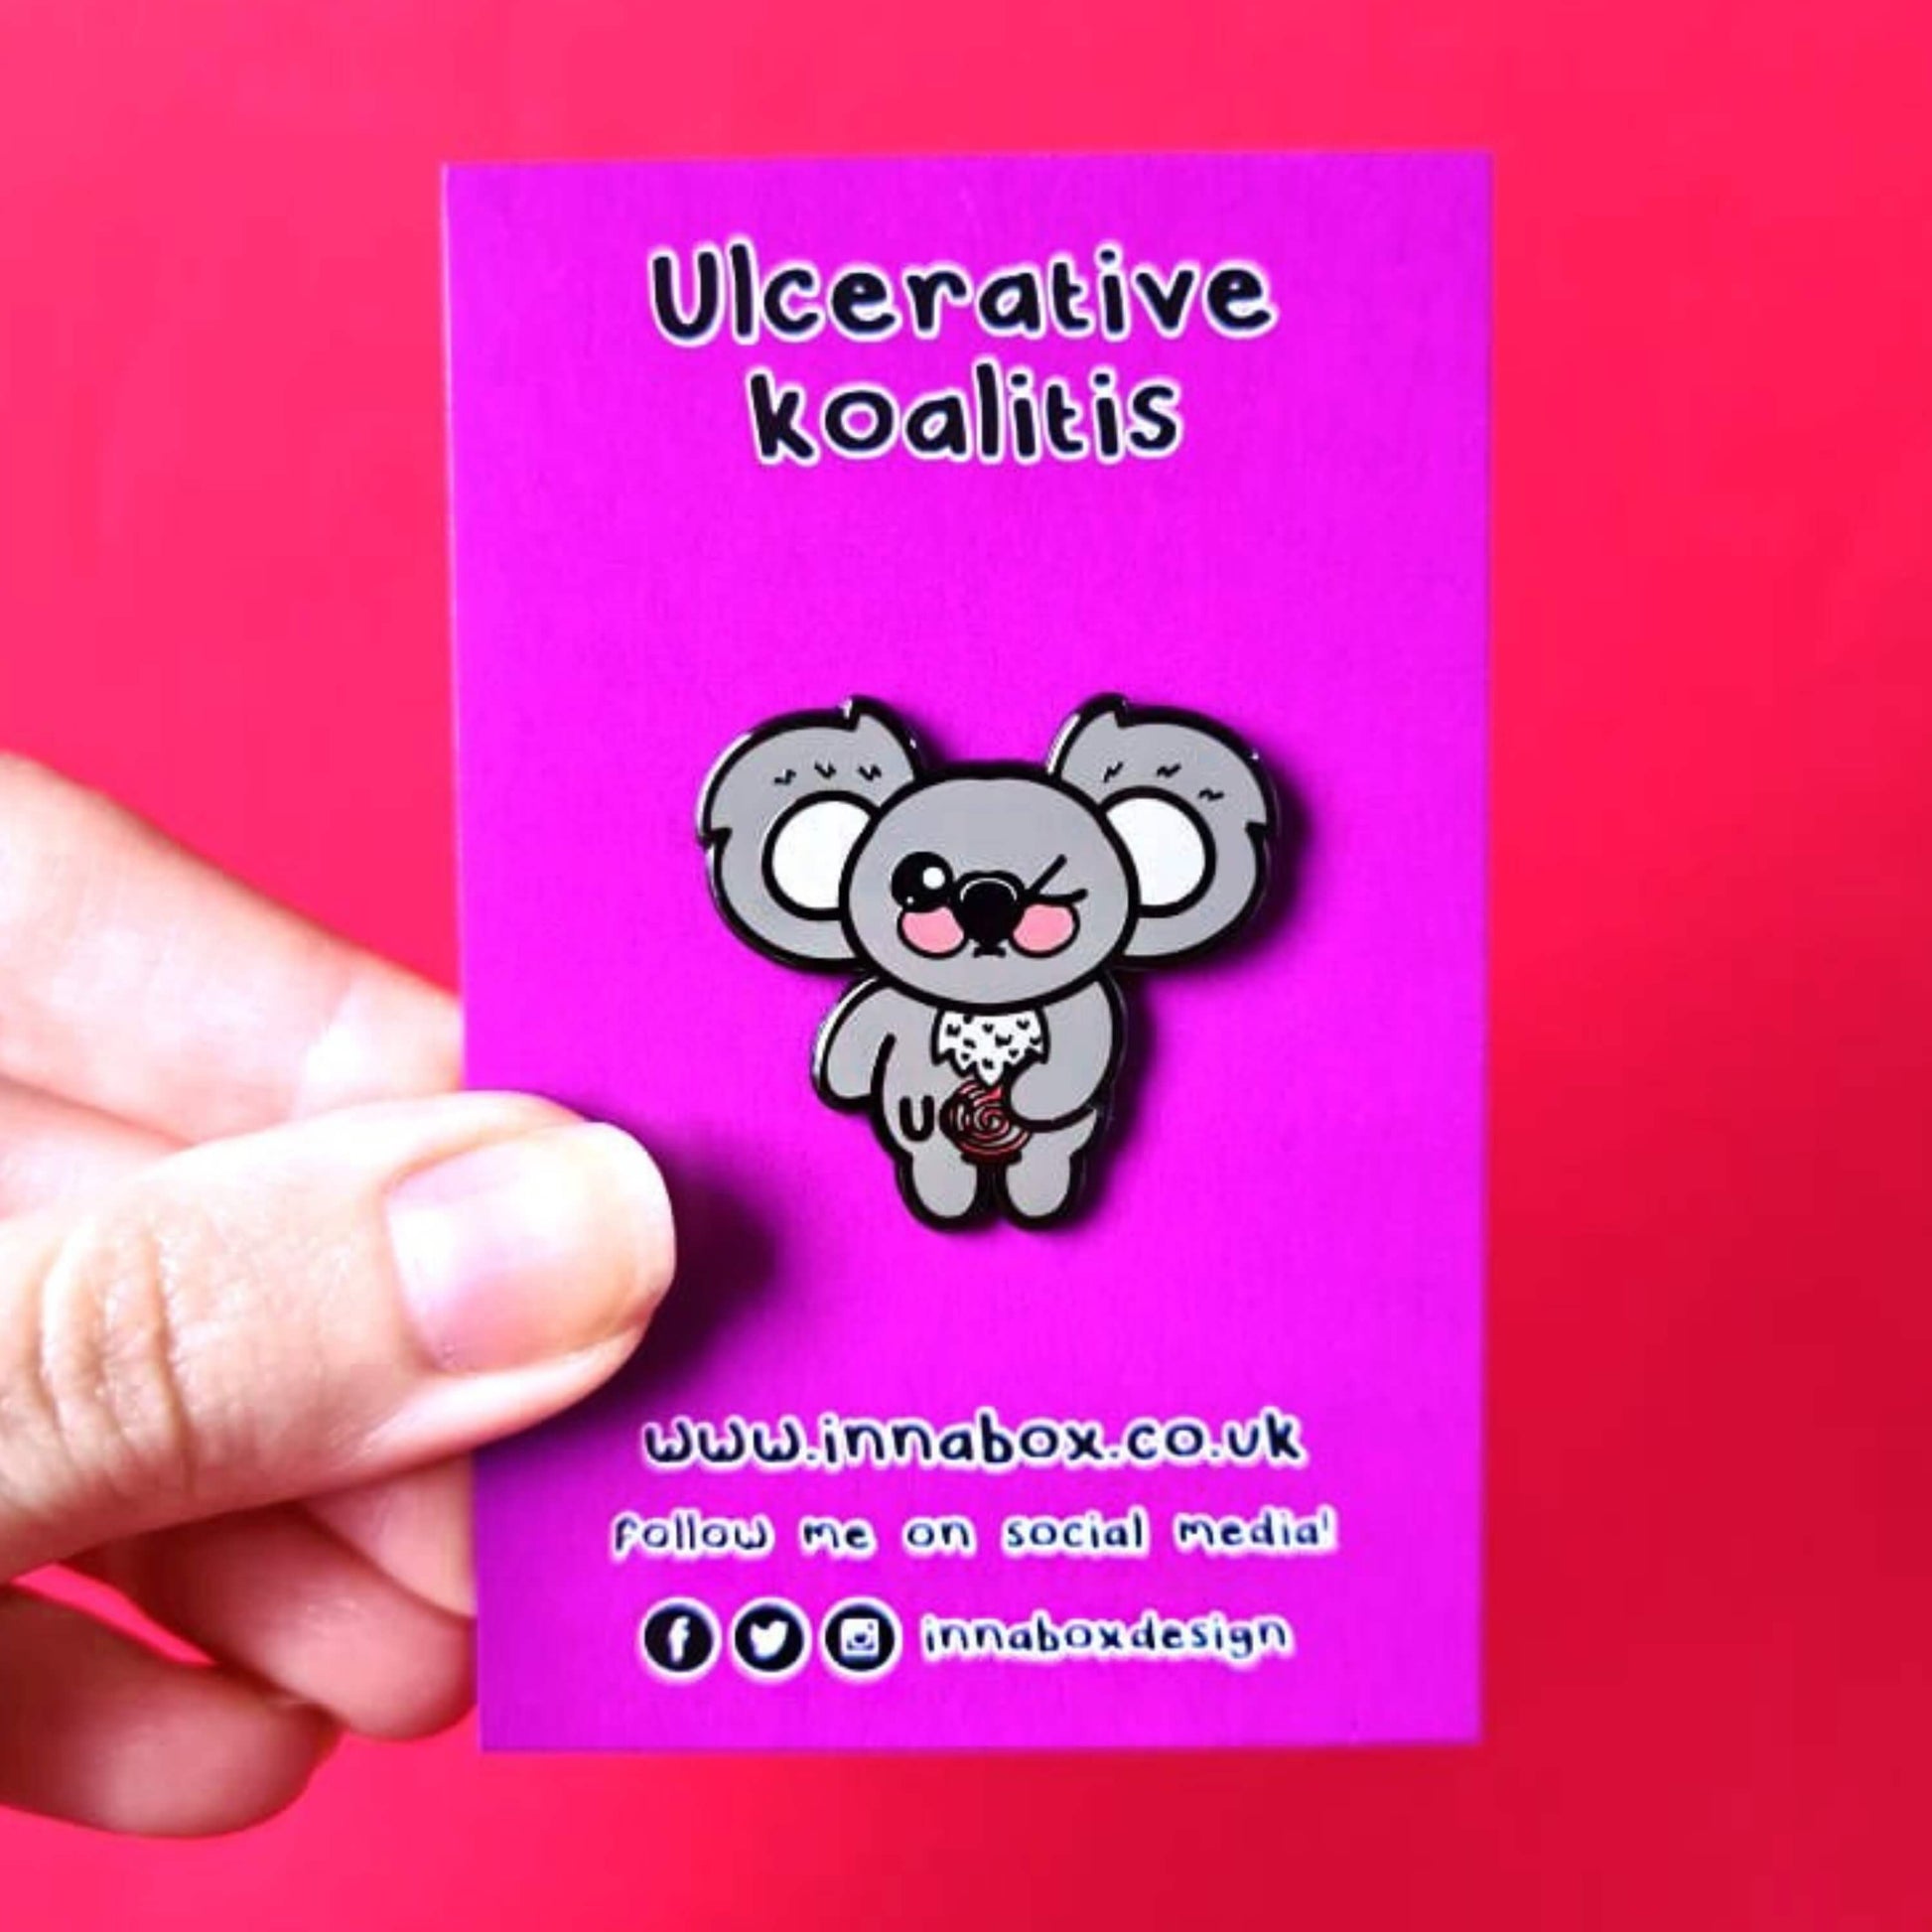 The Ulcerative Koalitis Koala Enamel Pin - Ulcerative Colitis UC on pink backing card held over a red background. The grey koala shaped enamel pin has one eye shut clutching its red swirly tummy with black text over it reading 'UC'. The hand drawn design is raising awareness for Ulcerative Colitis UC.